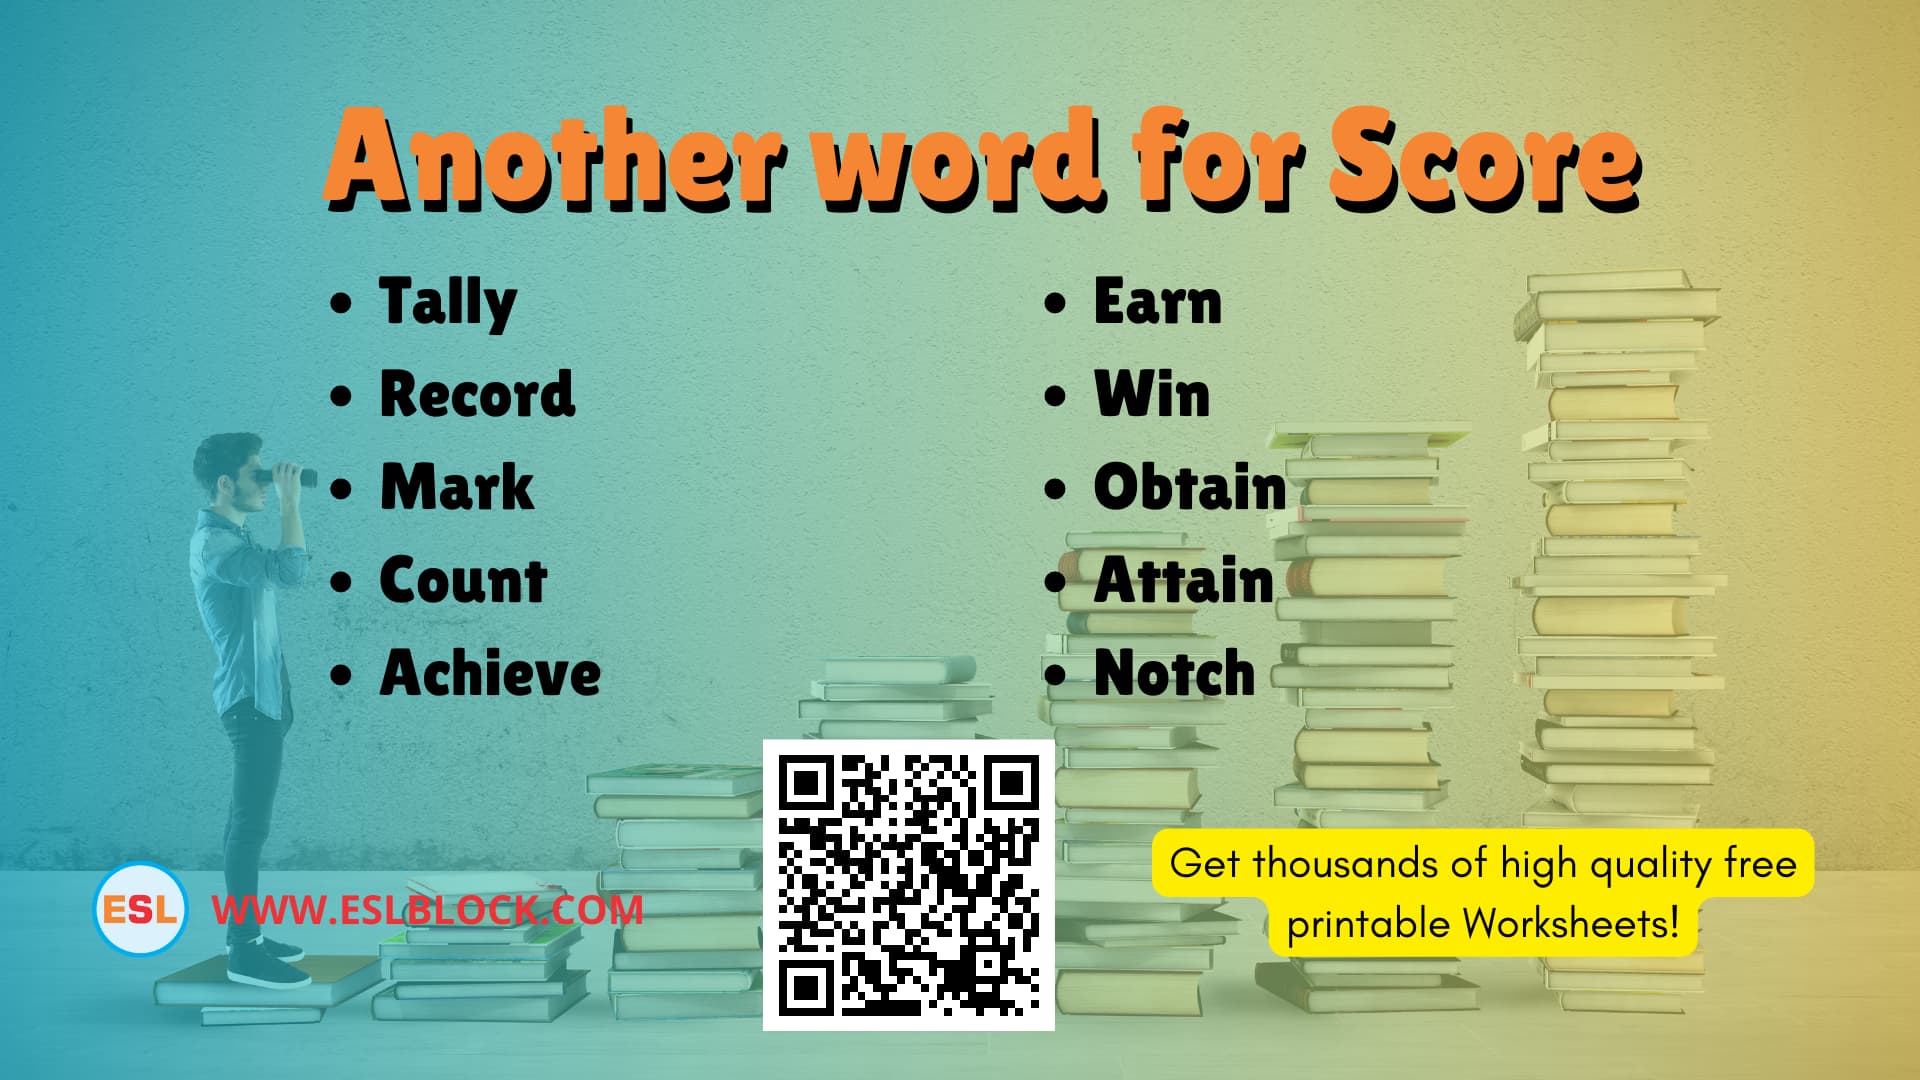 Copy of What is another word for Score